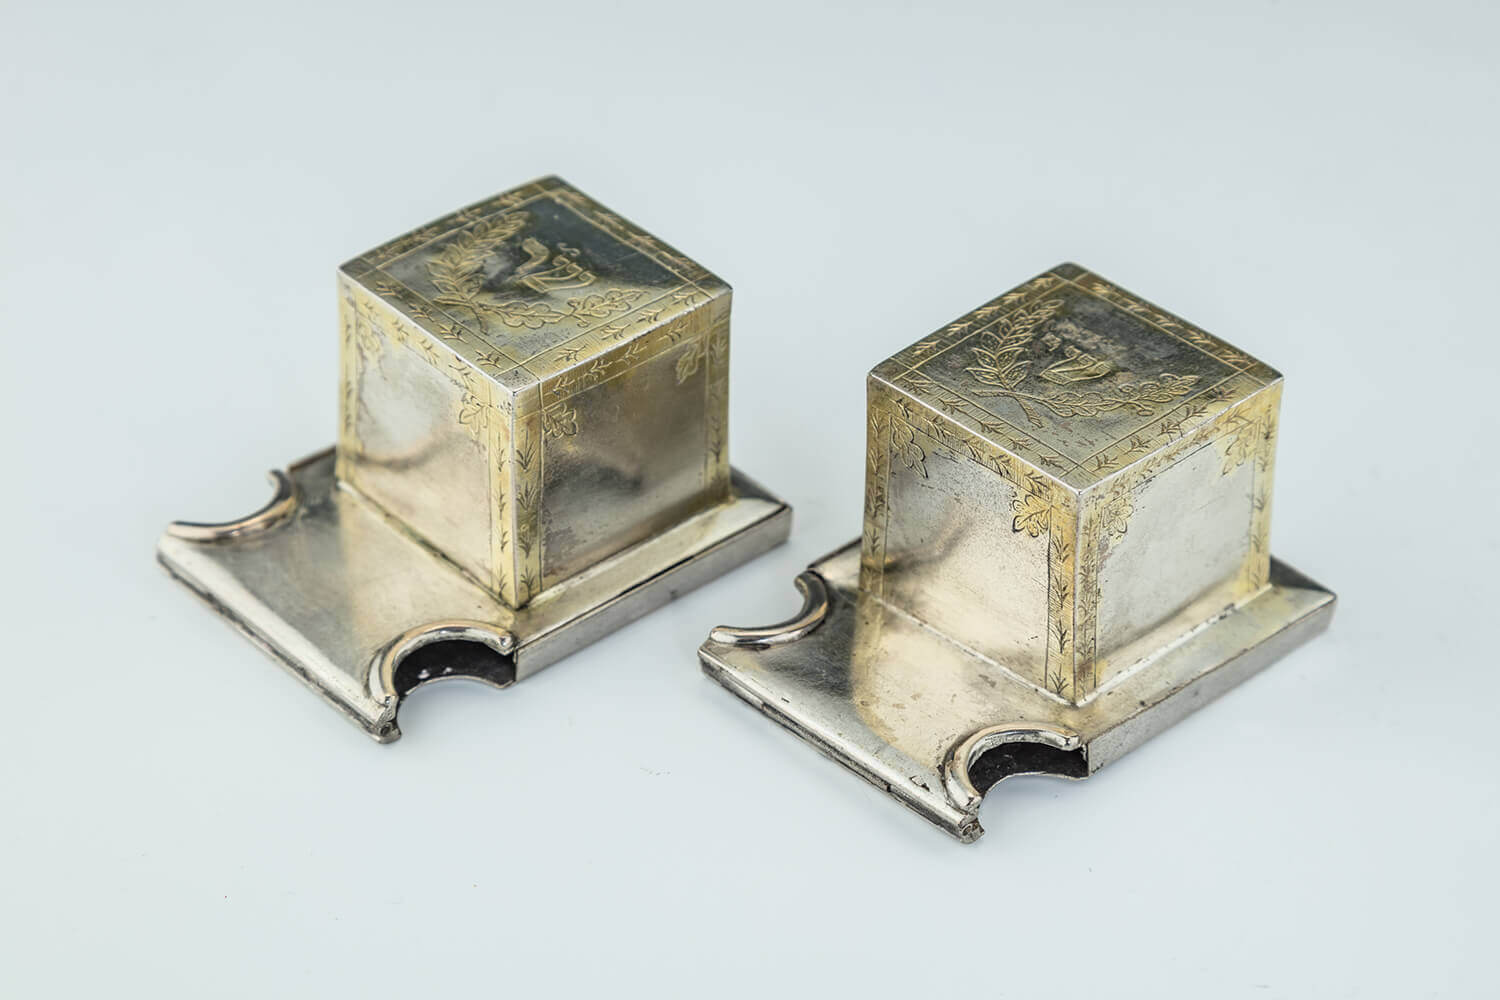 081. A PAIR OF SILVER TEFILLIN COVERS